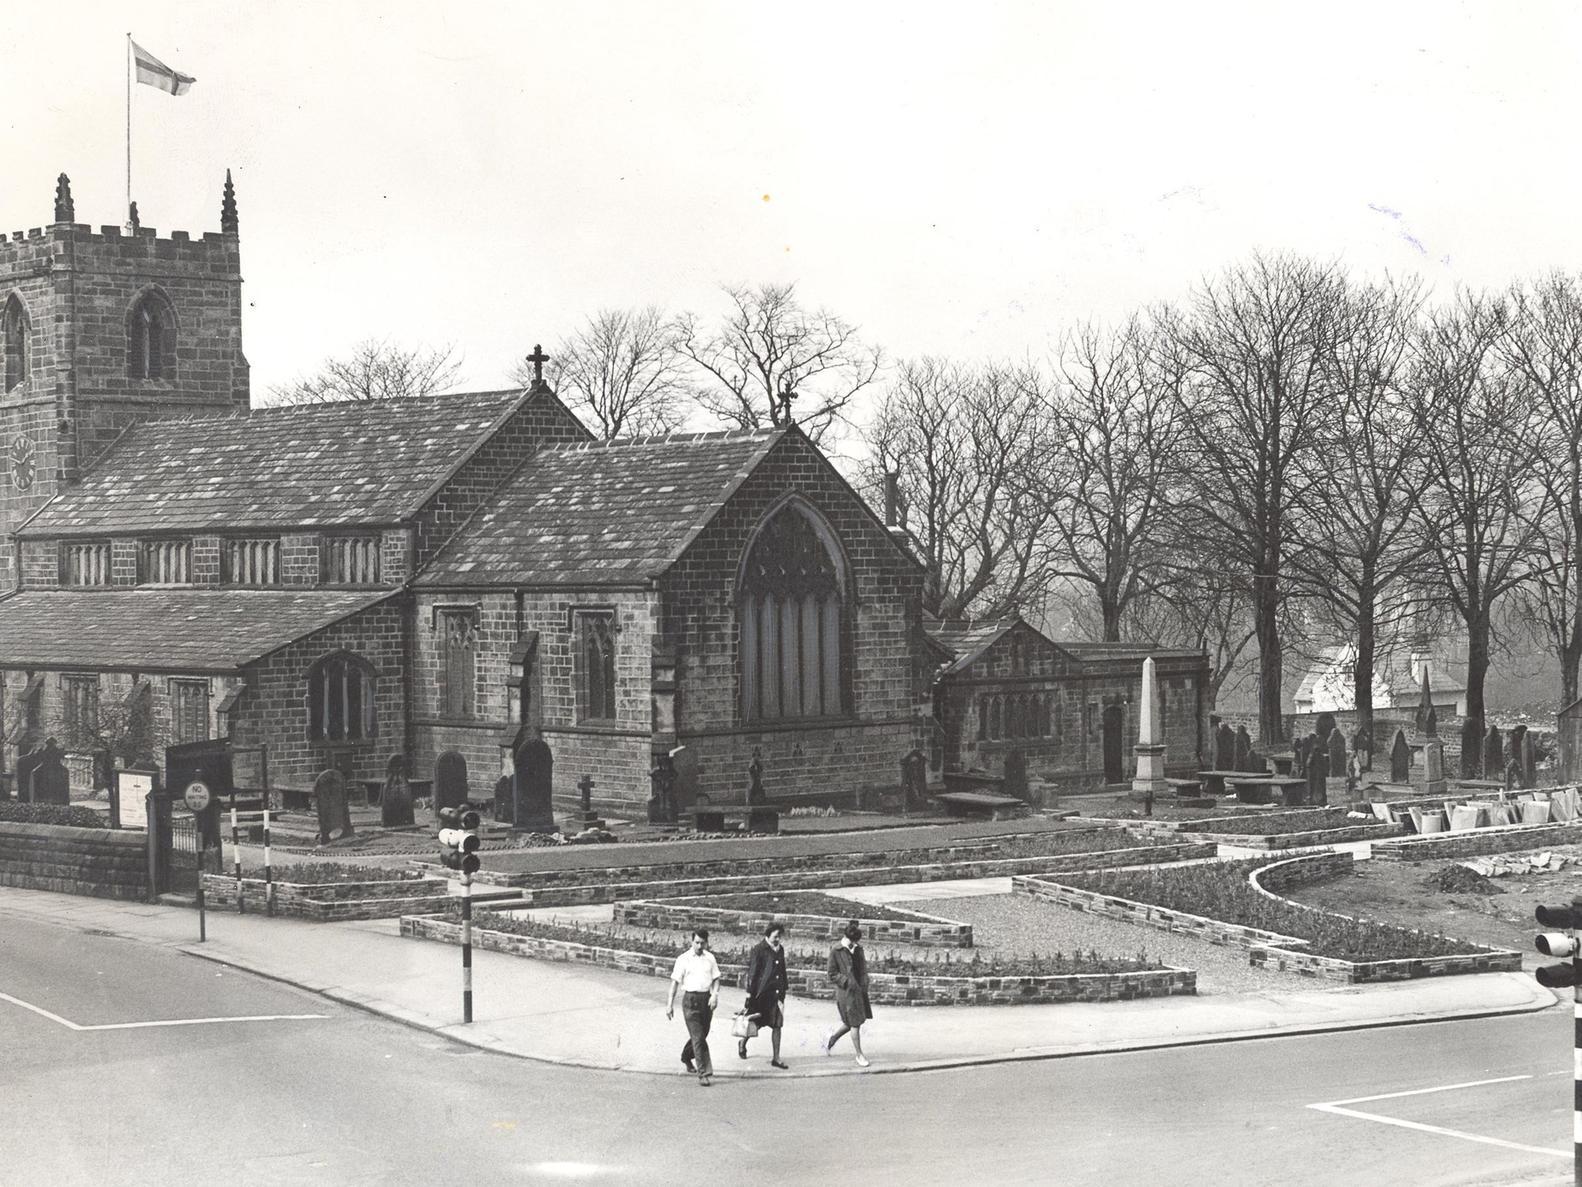 The new gardens and flower beds on the site of the old Wheatsheaf Hotel which was demolished the previous year. It opened up this view of the Parish Church.